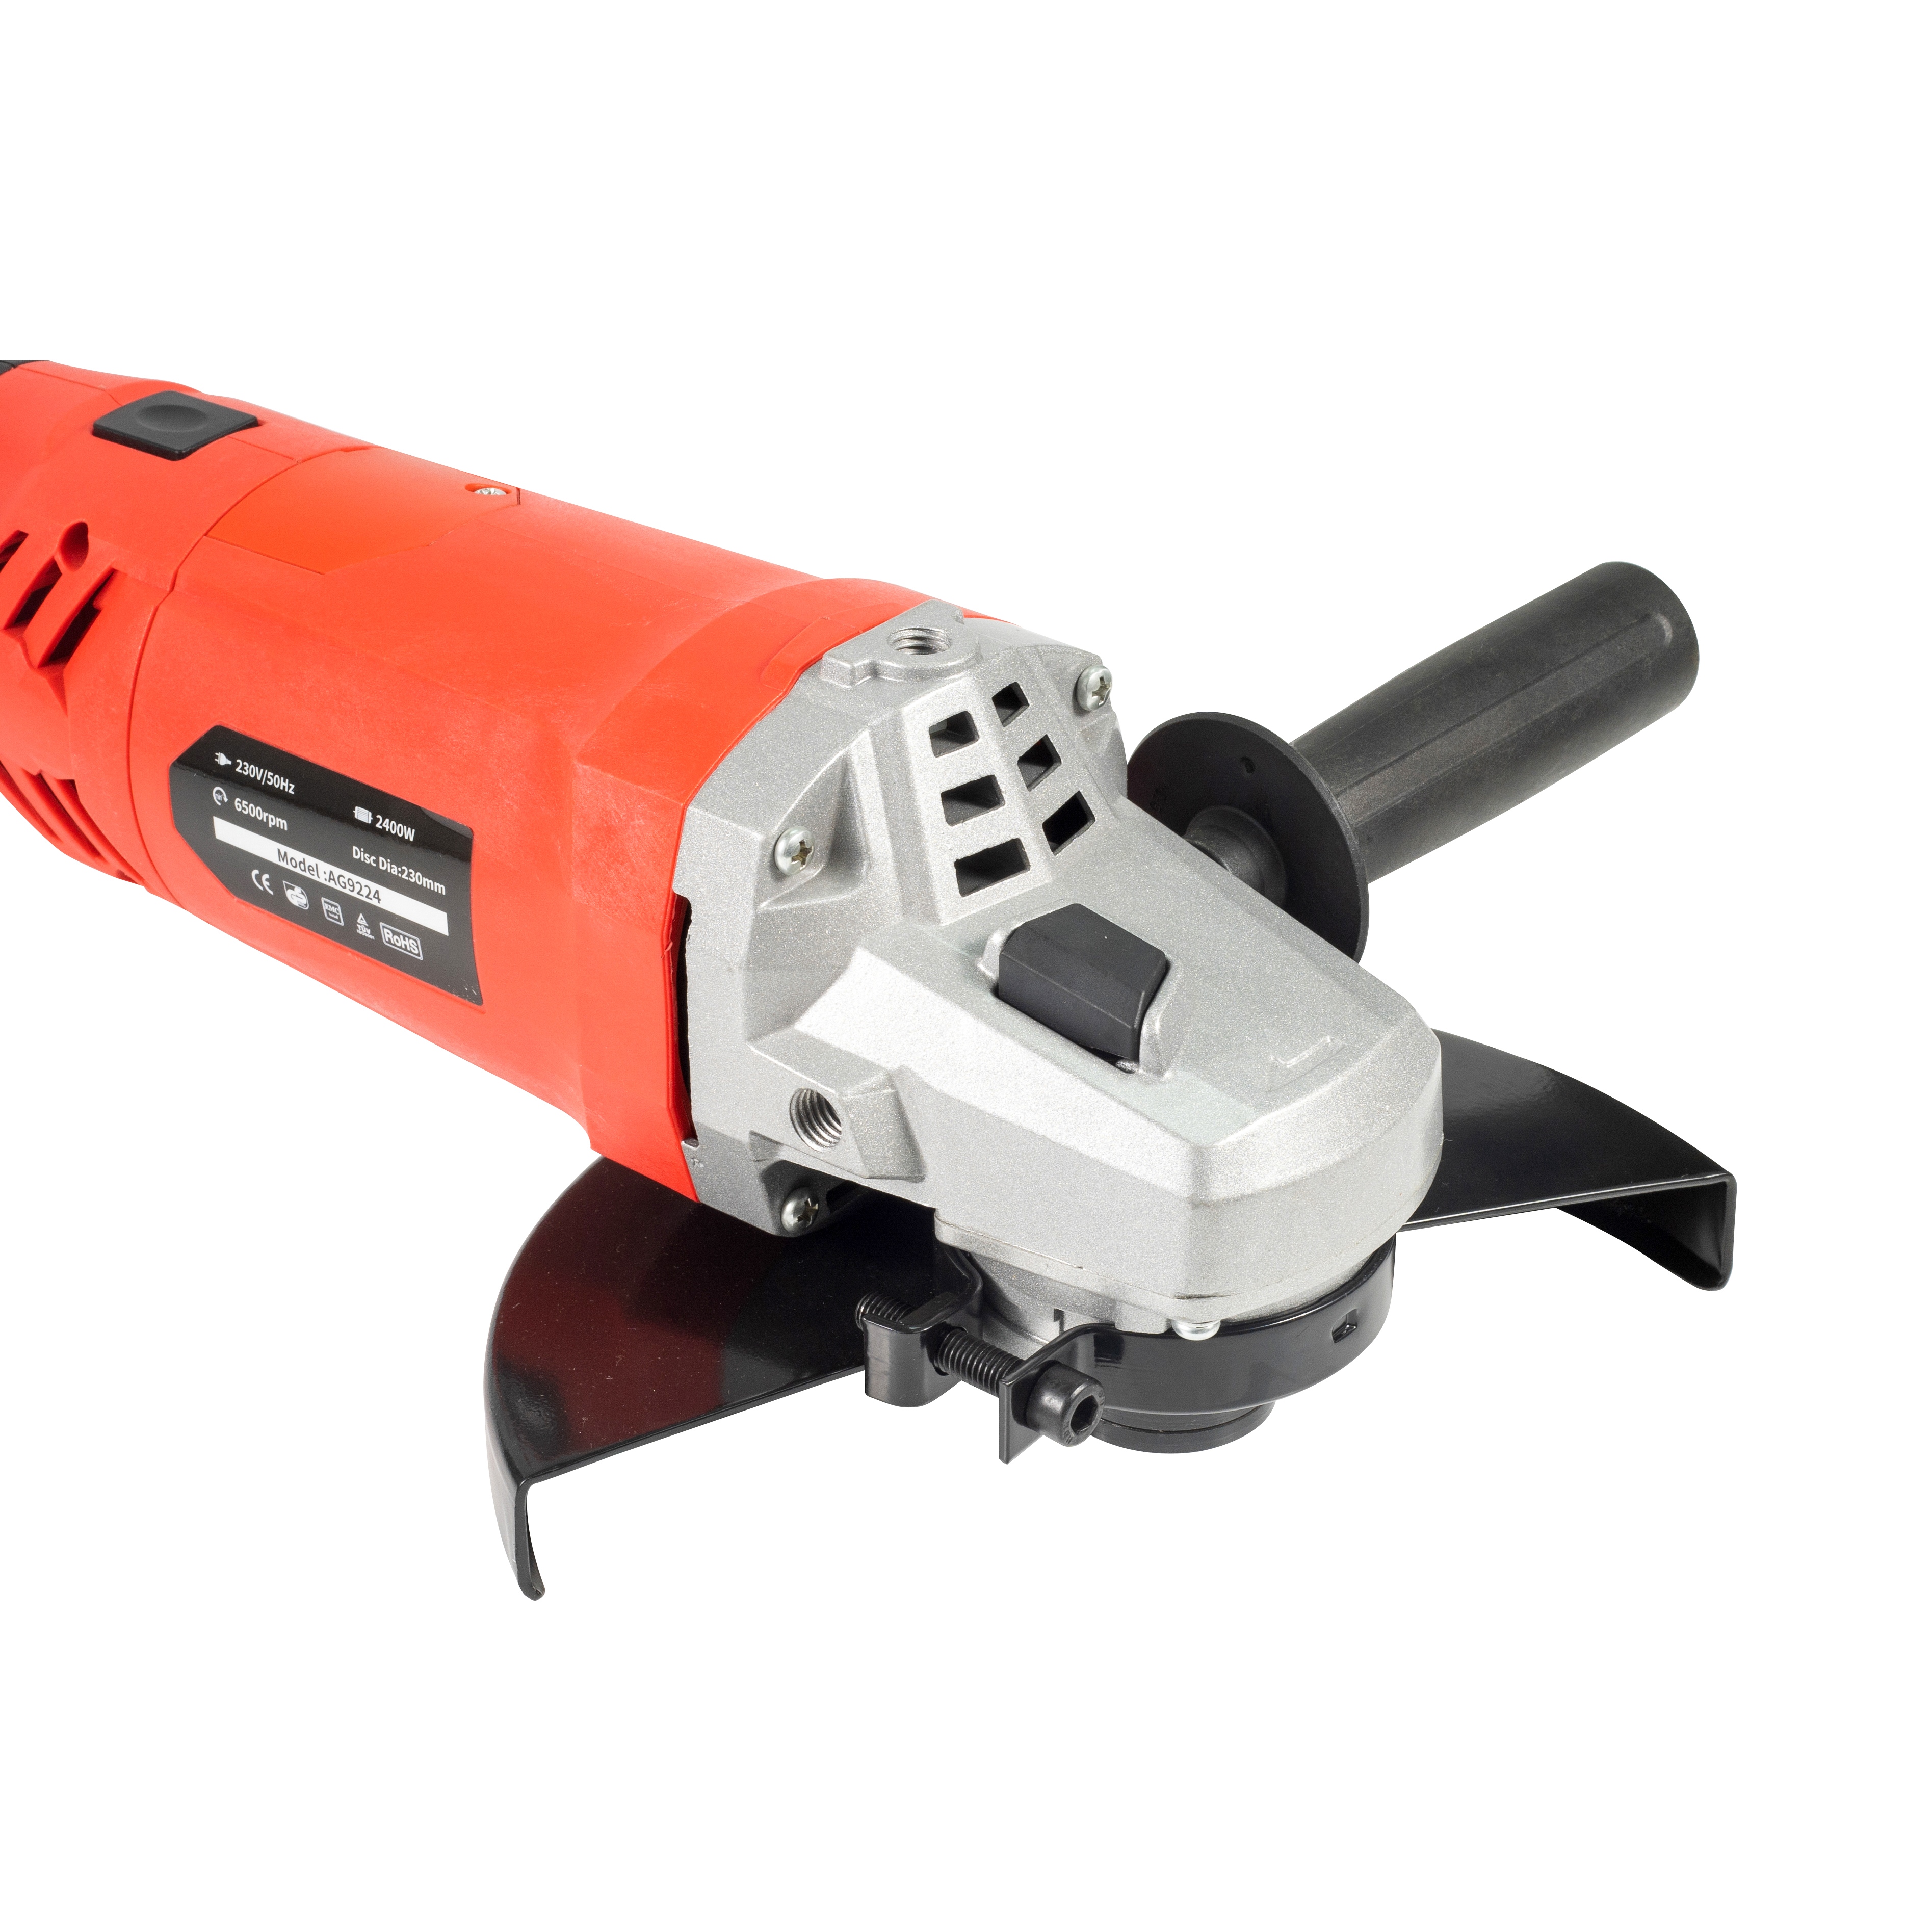 How to Use an Angle Grinder Tool (DIY)